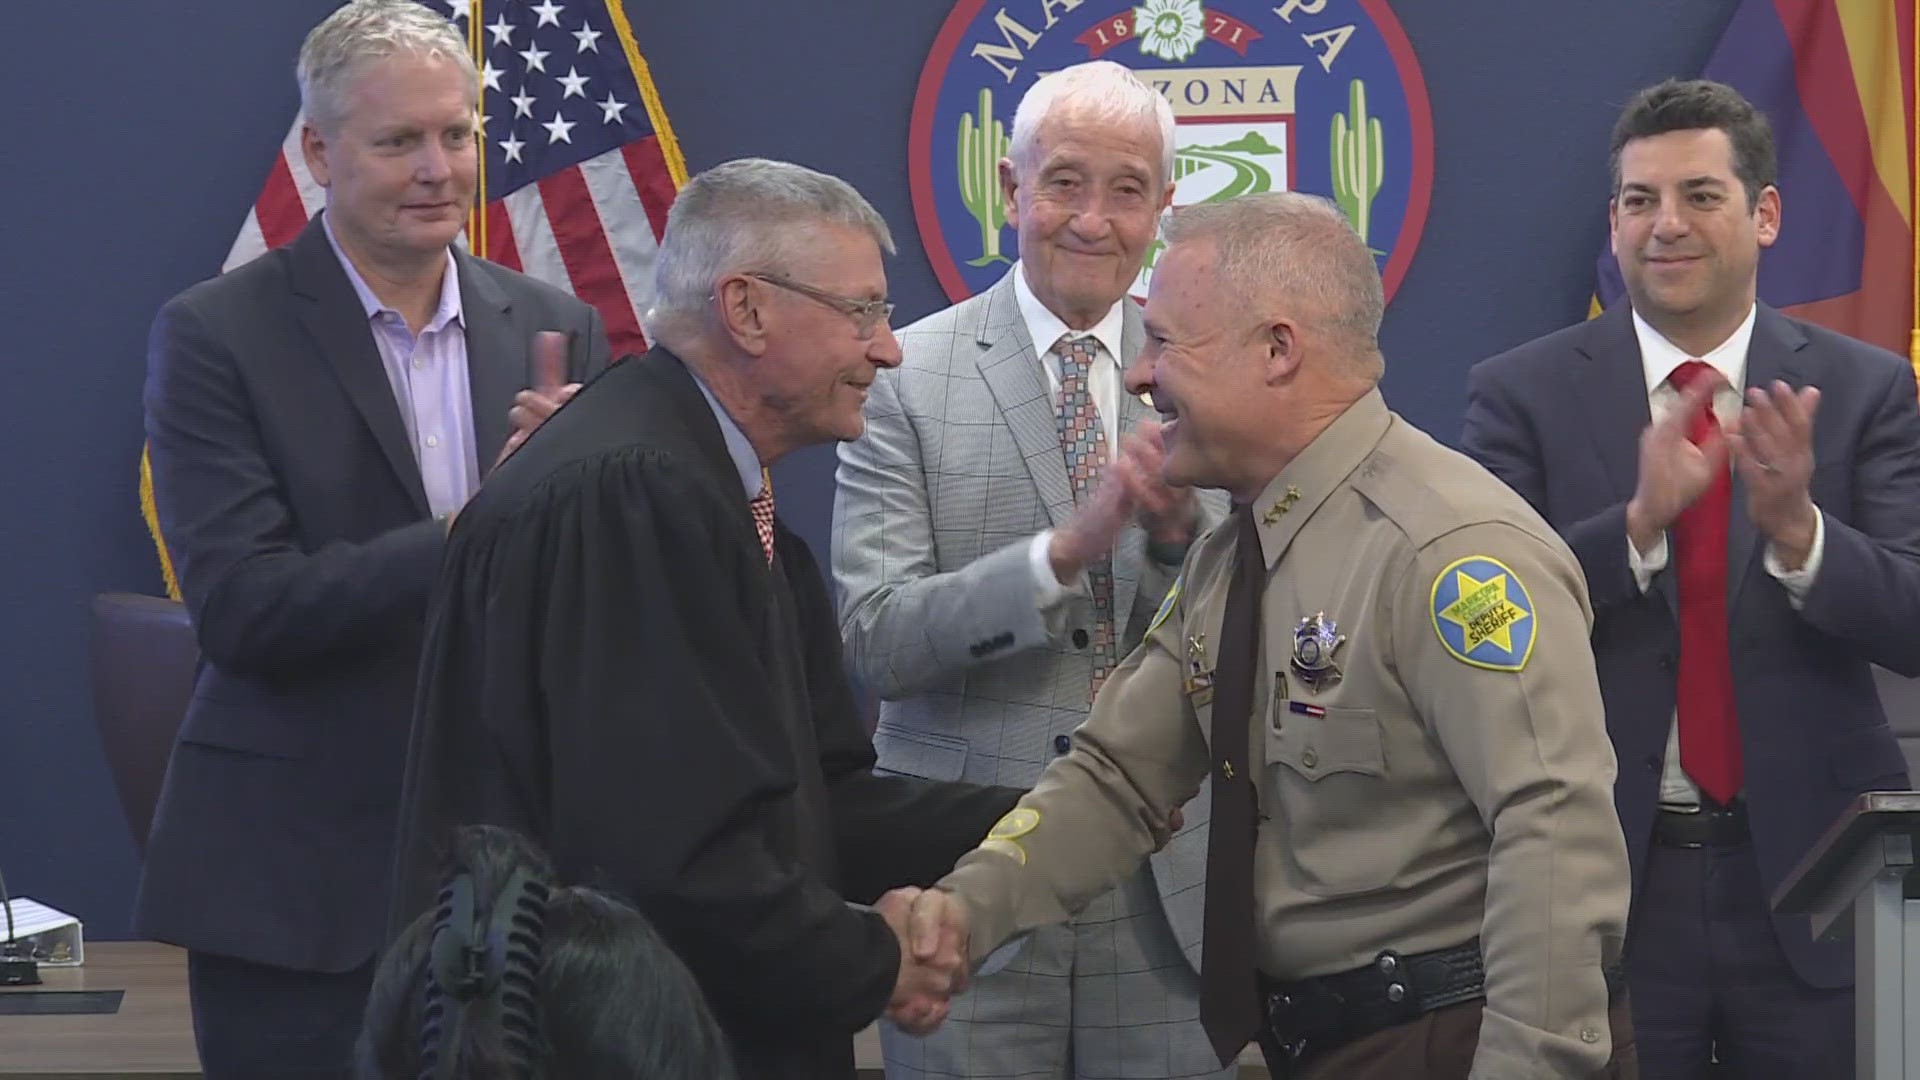 Maricopa County Appoints New Sheriff After Penzone Resignation 9133